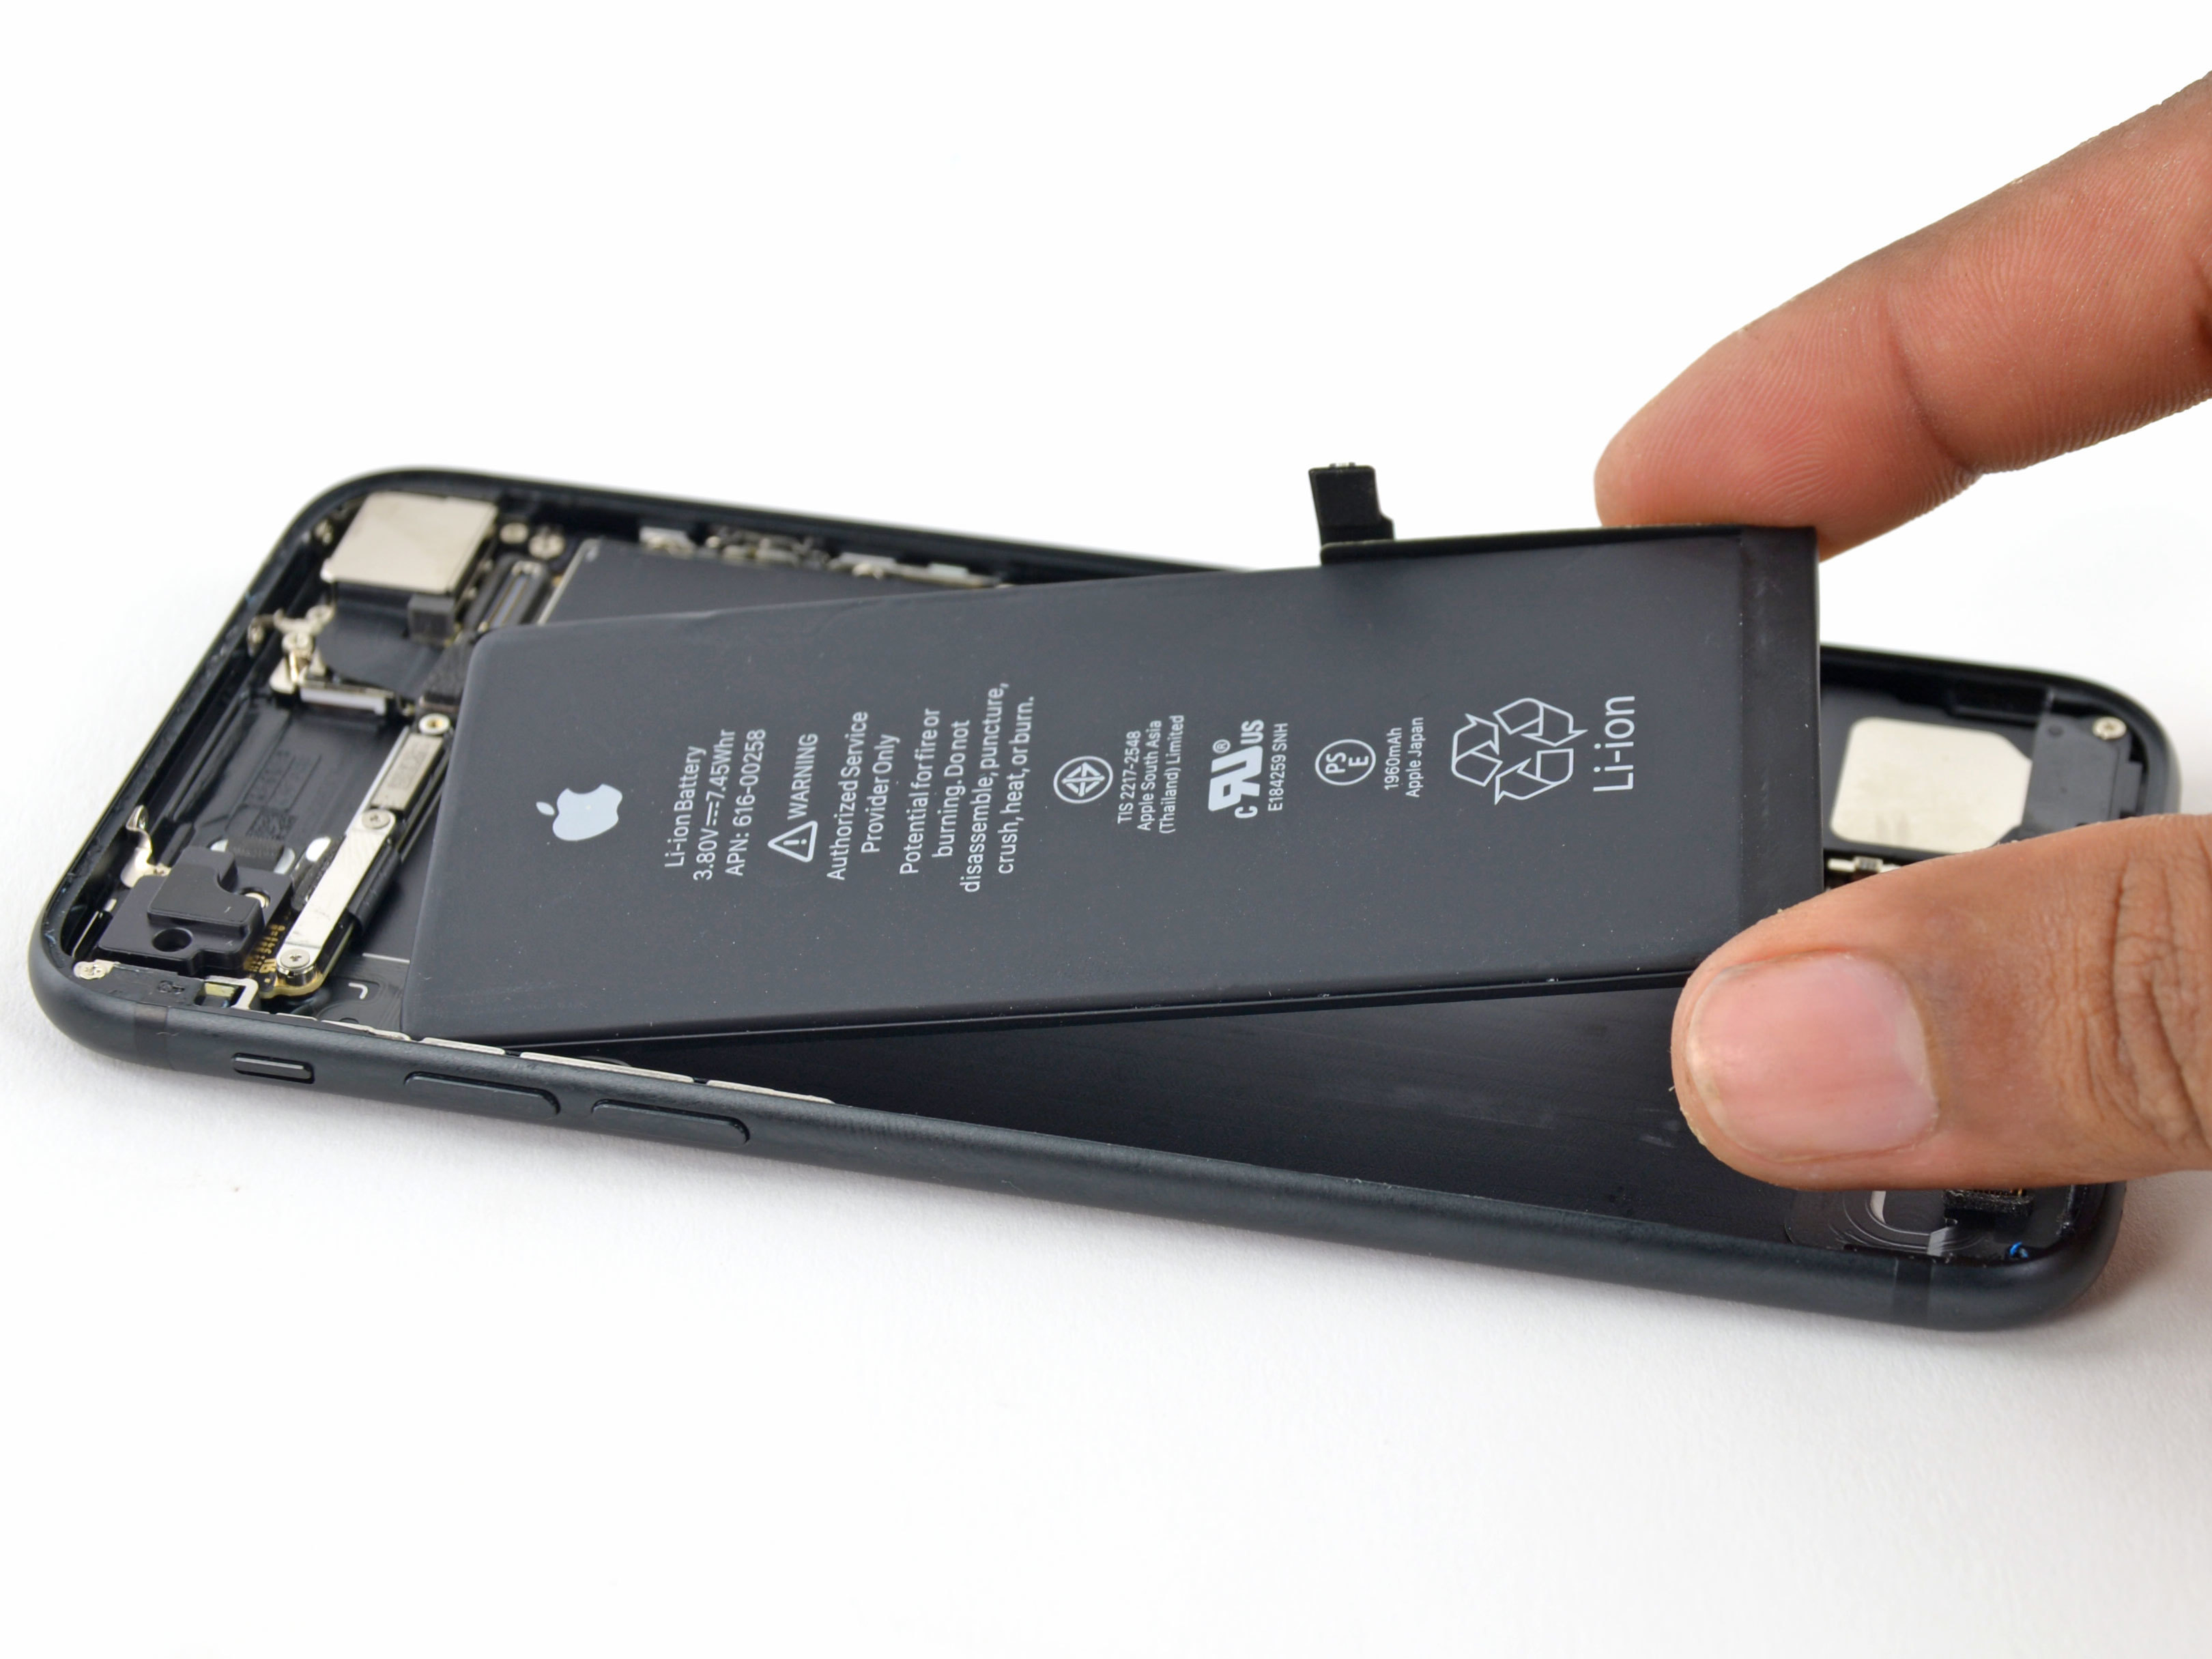 iPhone Battery: Varying Mileage